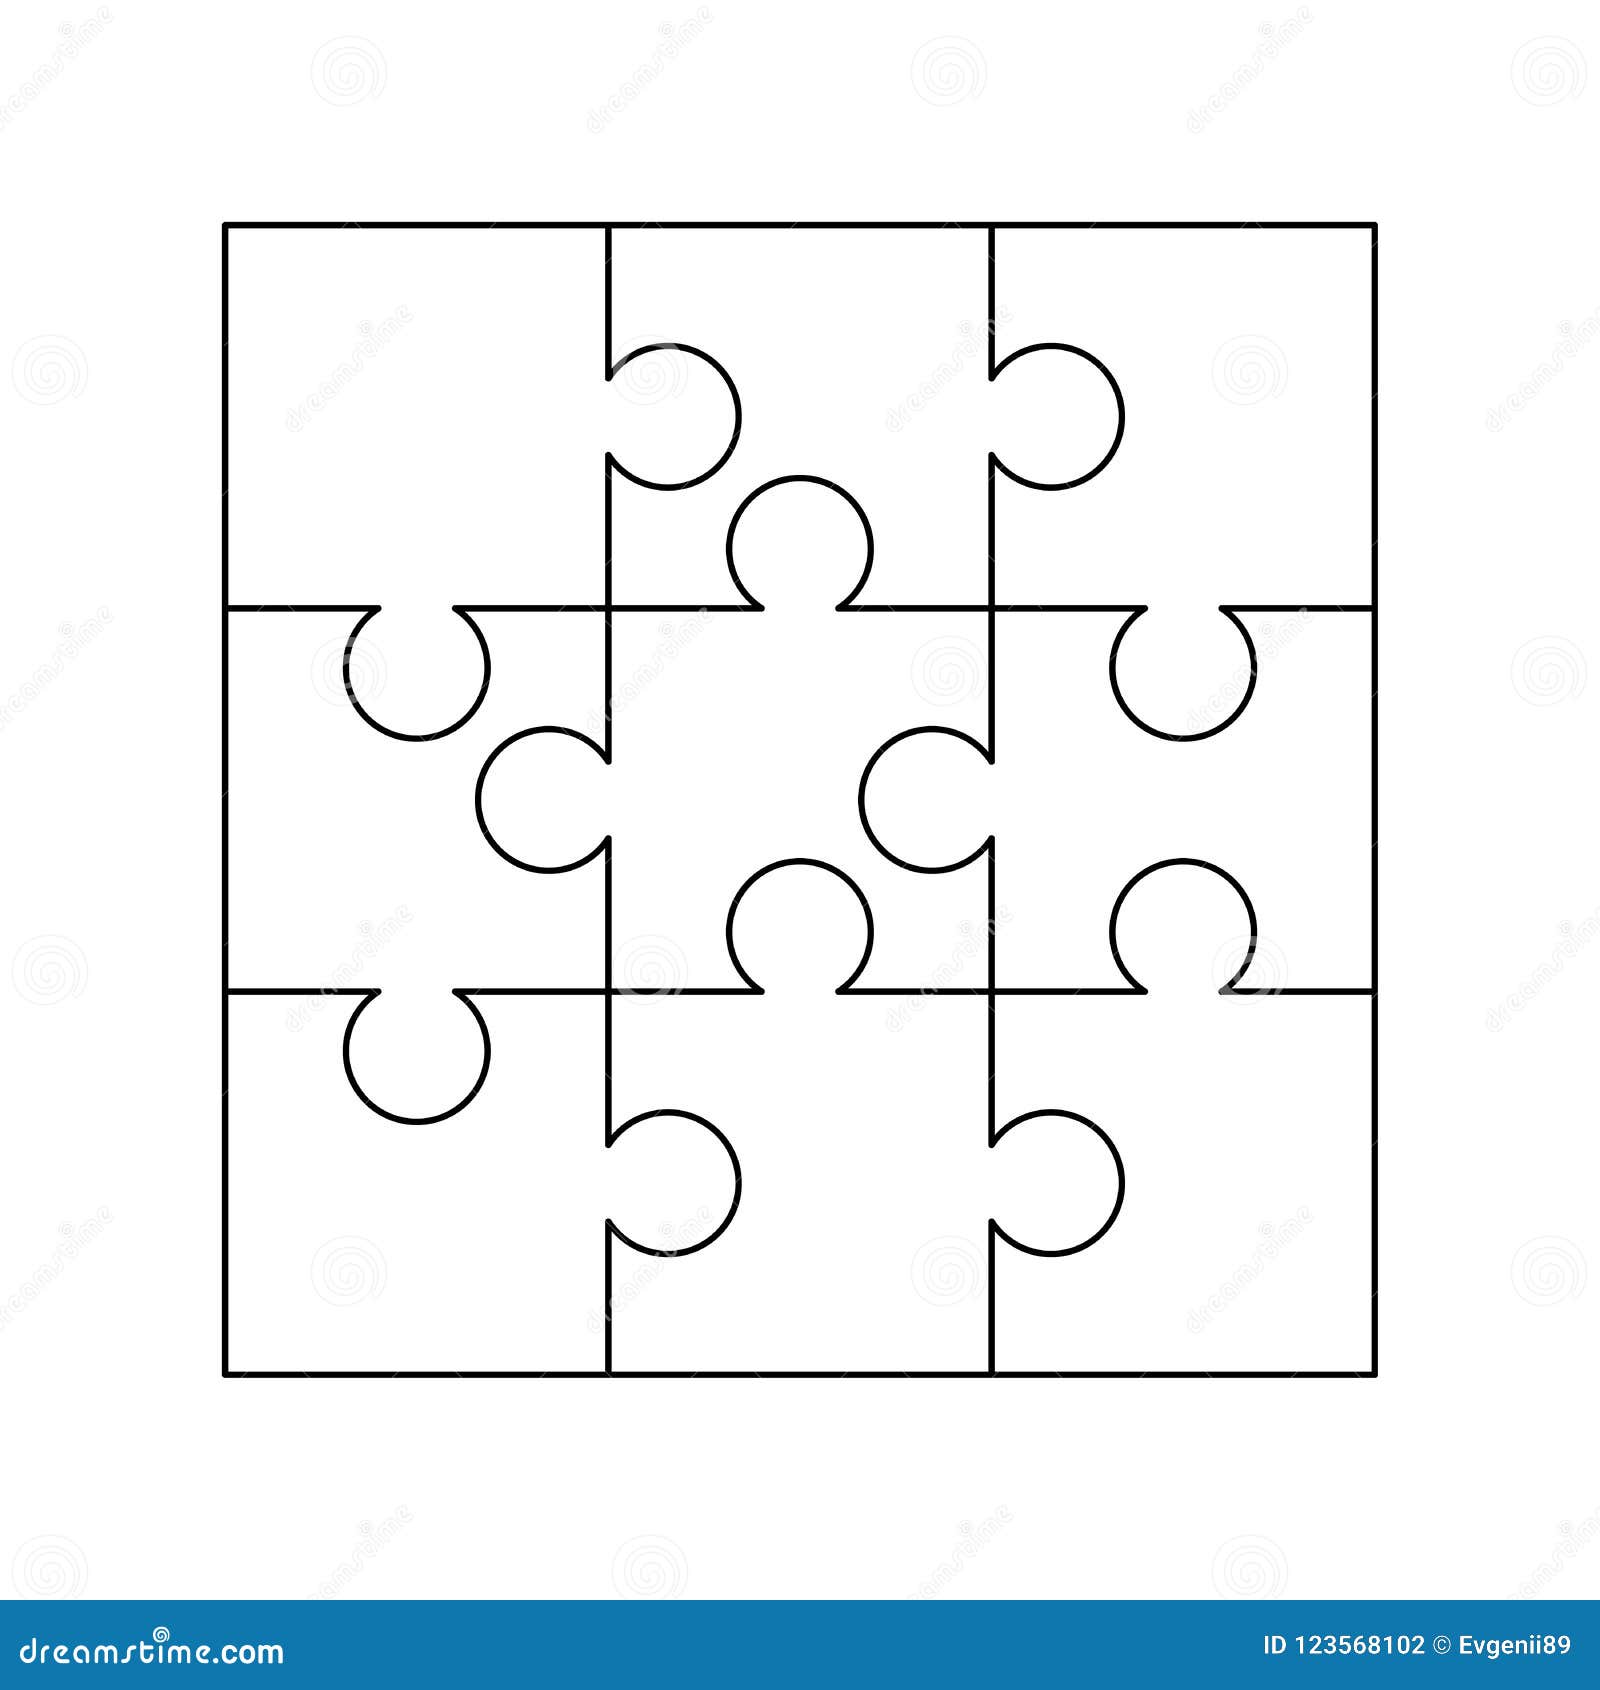 9 White Puzzles Pieces Arranged in a Square. Jigsaw Puzzle Template ...